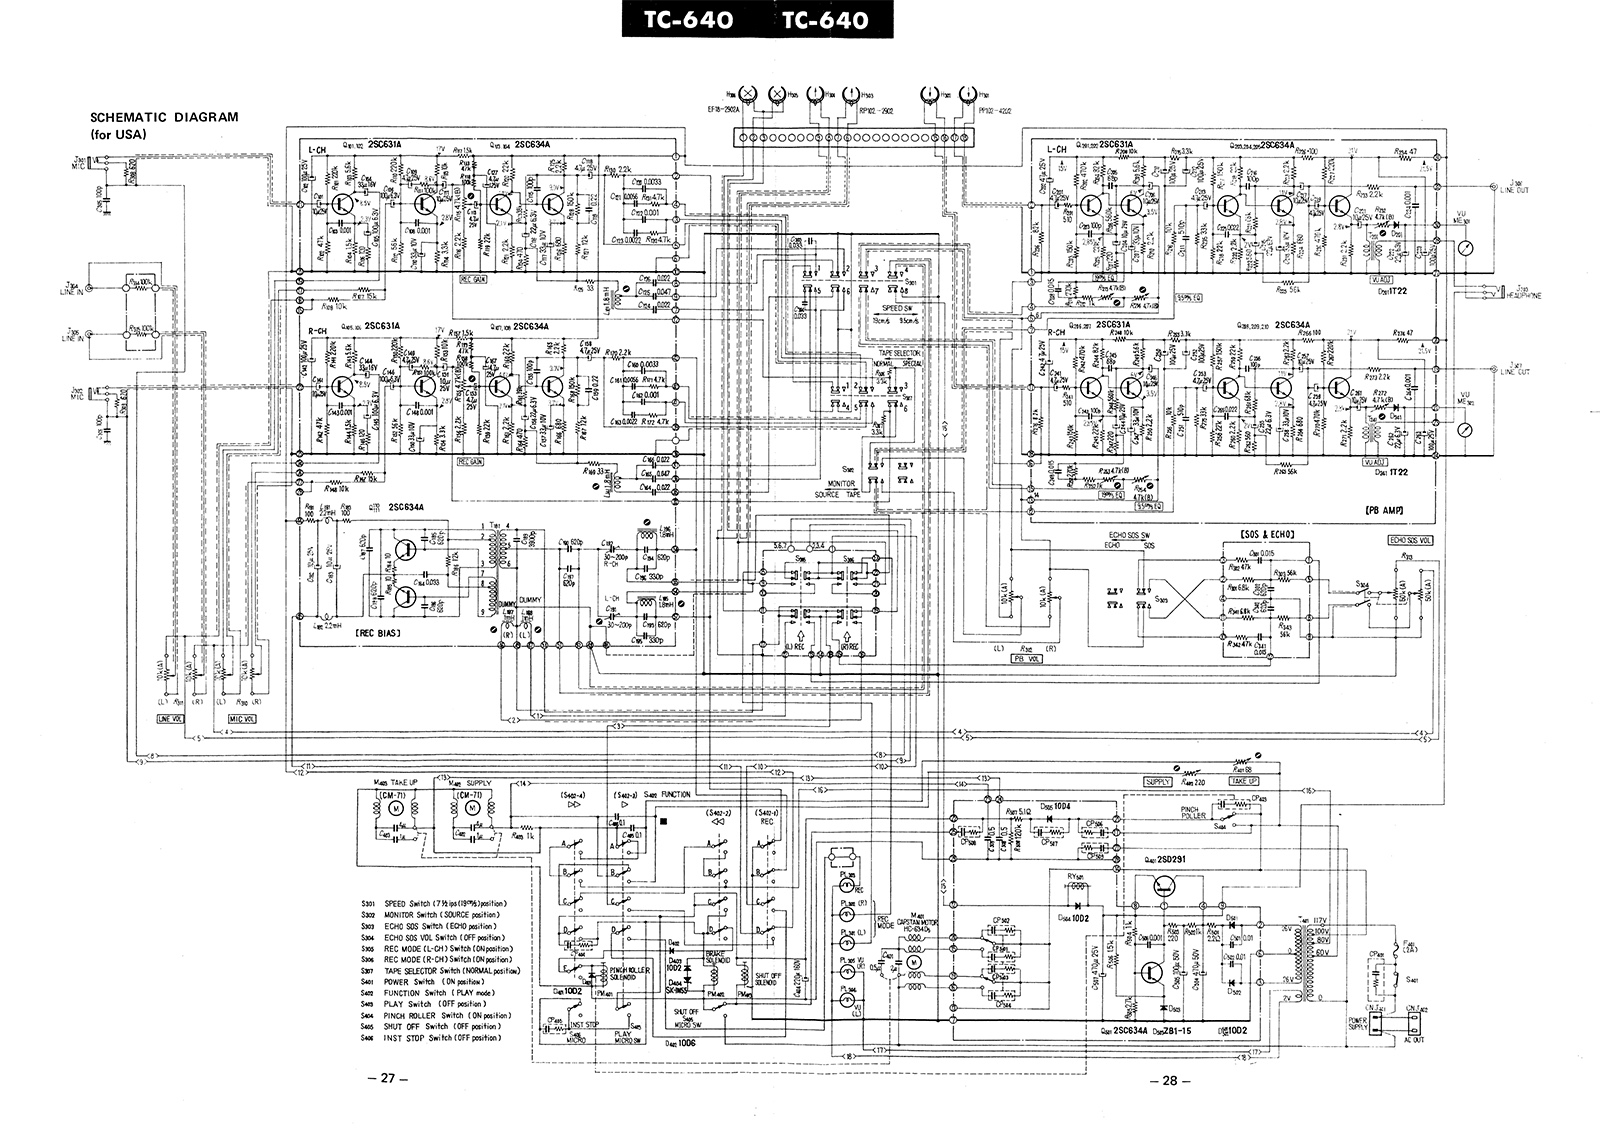 Schematic diagram of Bill's reel-to-reel tape machine – the Sony TC-640